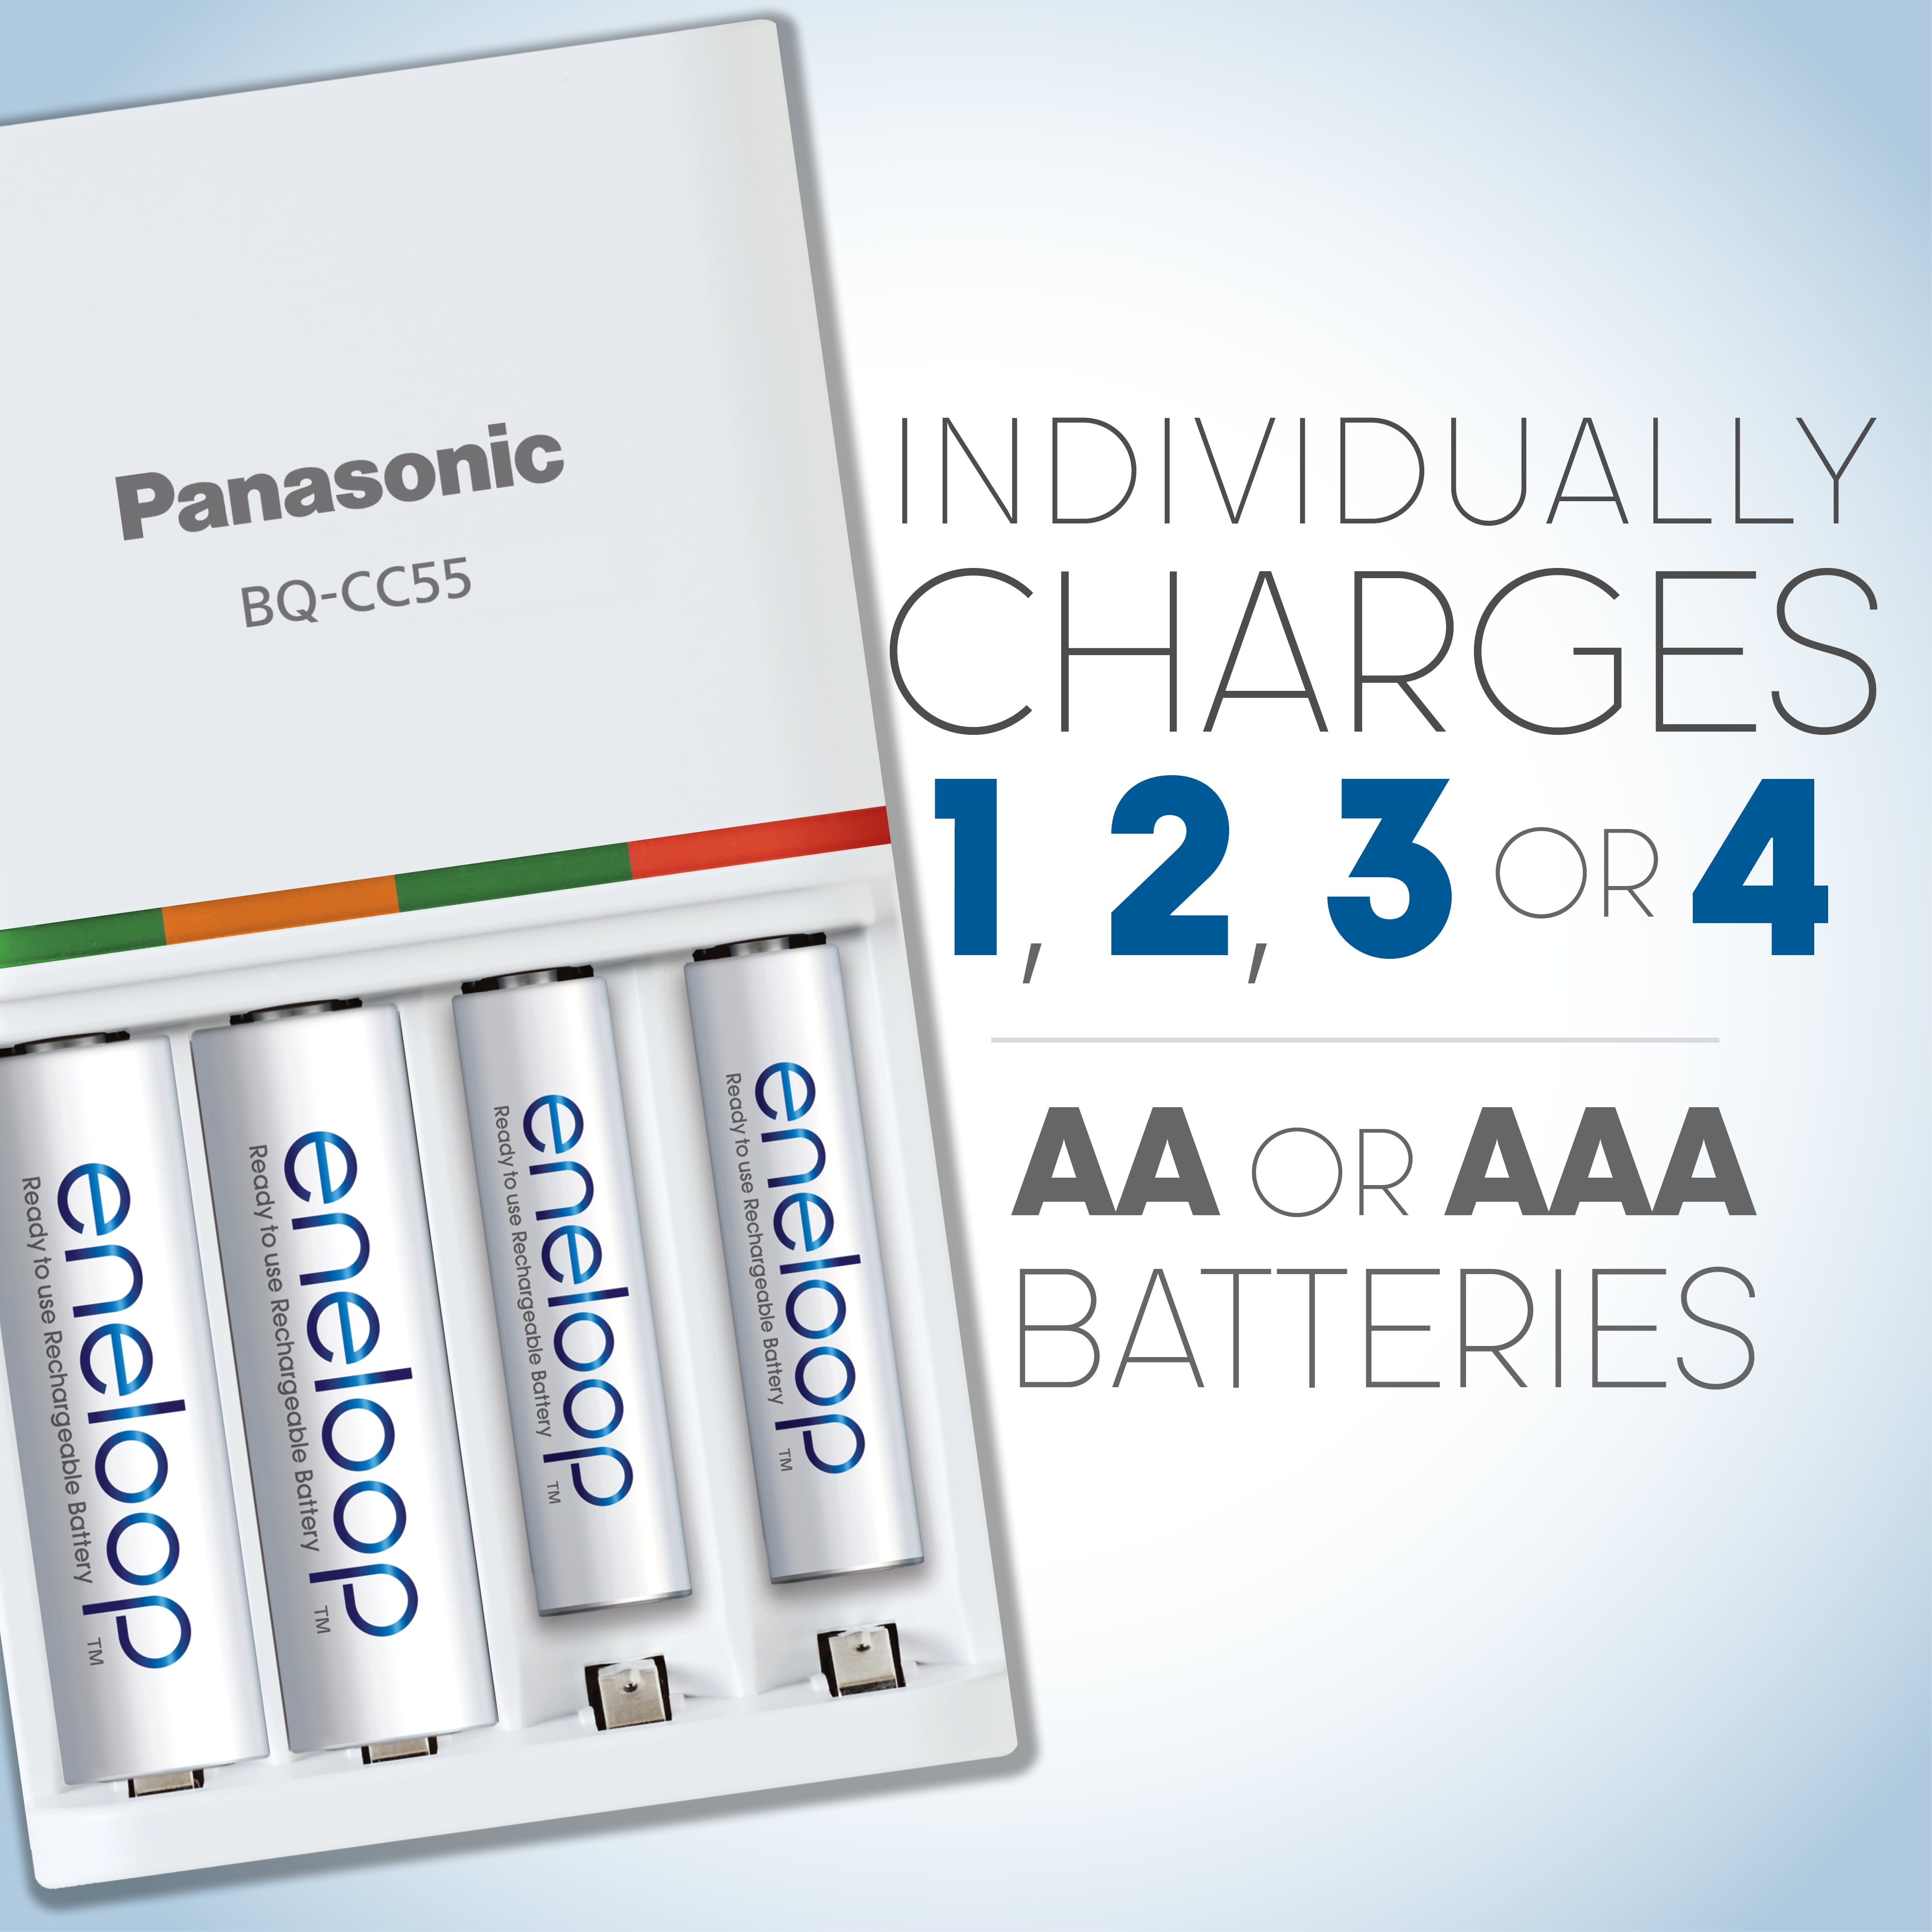 Panasonic K-KJ87M3A4BA Individual Battery Charger with Portable Charging  Technology and 4AAA Eneloop Rechargeable Batteries, White 